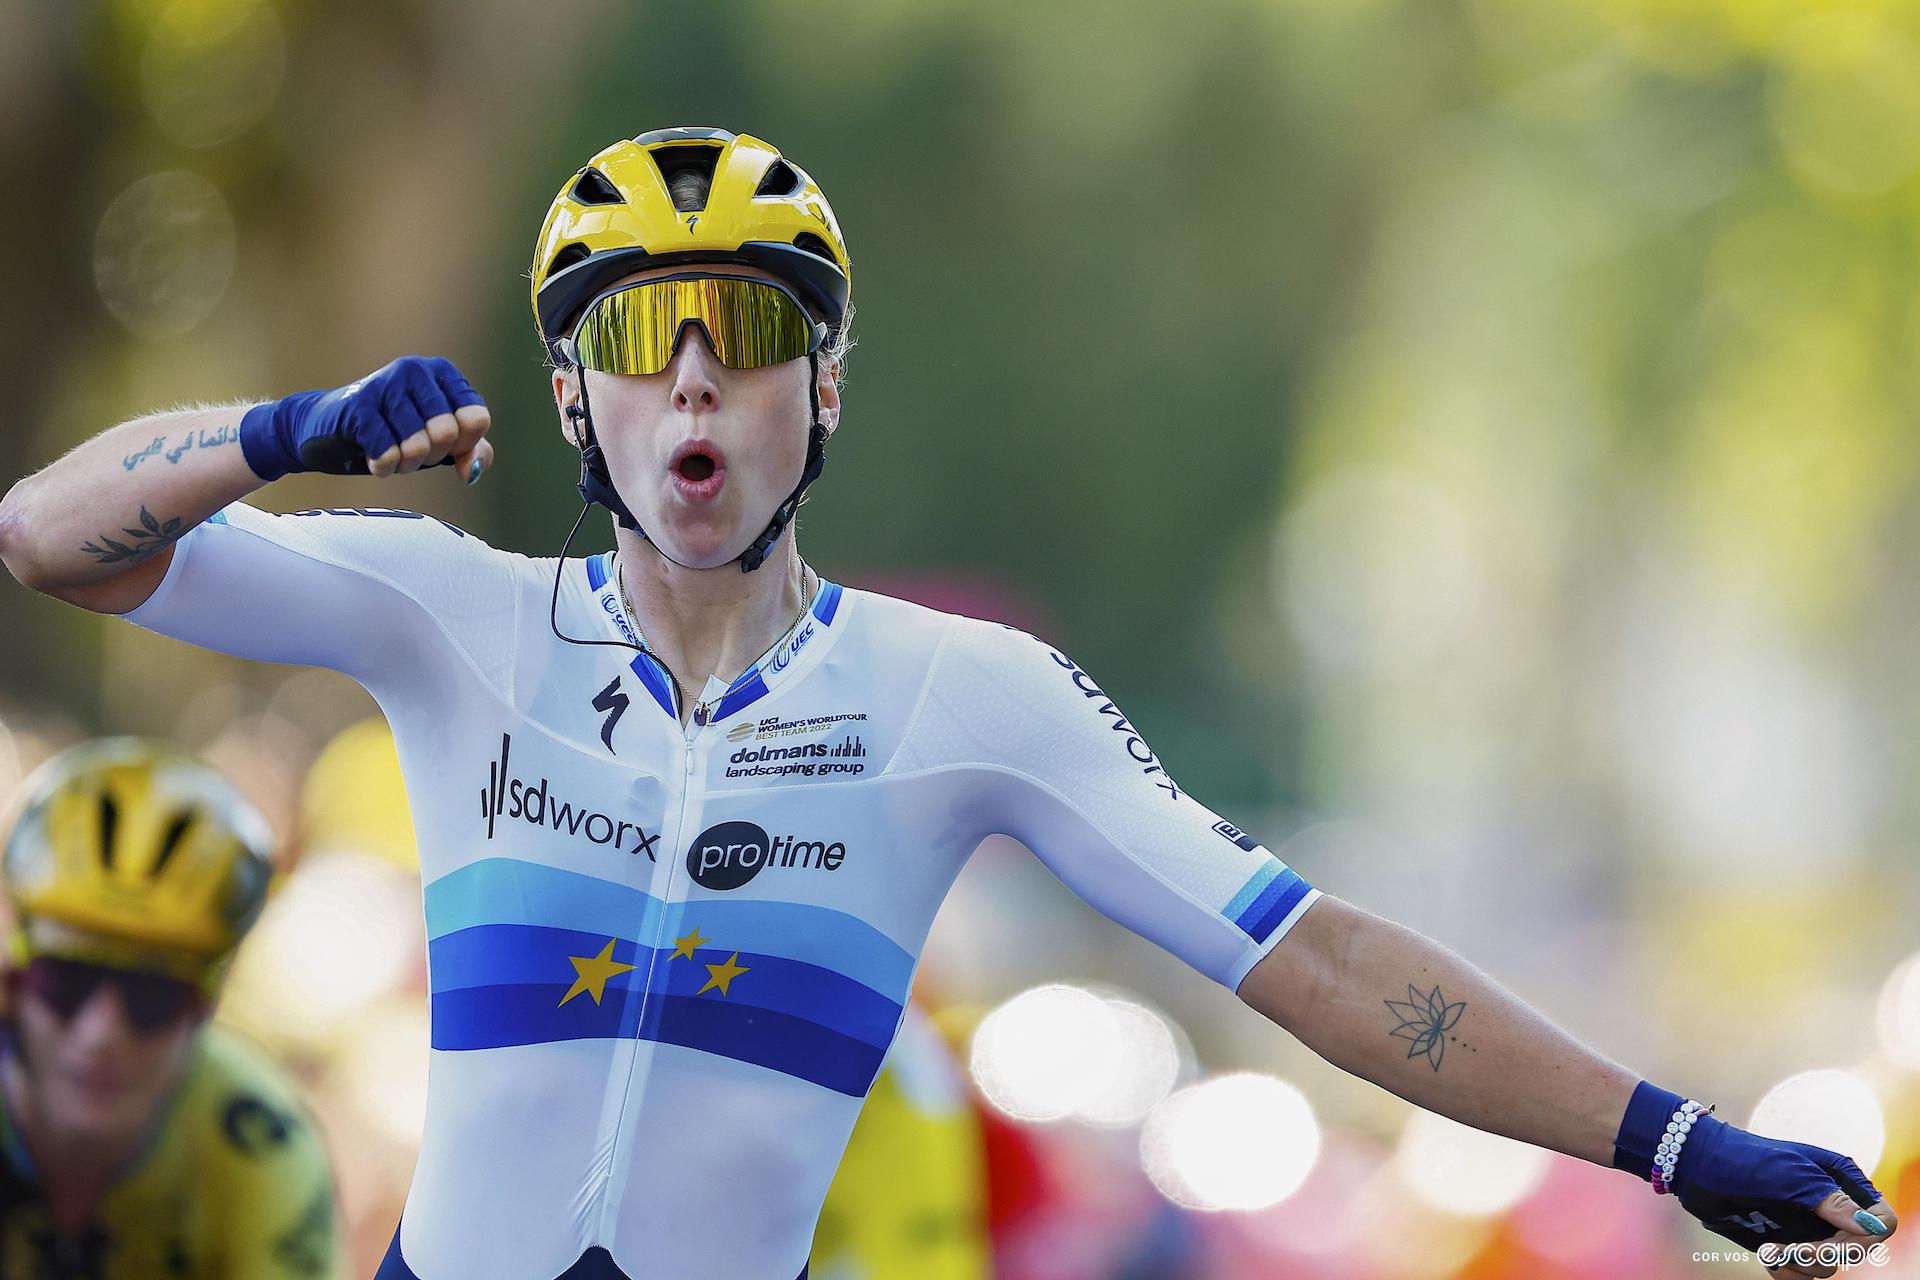 Lorena Wiebes punches the air as she wins stage 3 of the 2023 Tour de France Femmes. She's wearing the European Champion kit, with blue bands and yellow stars on a white field.